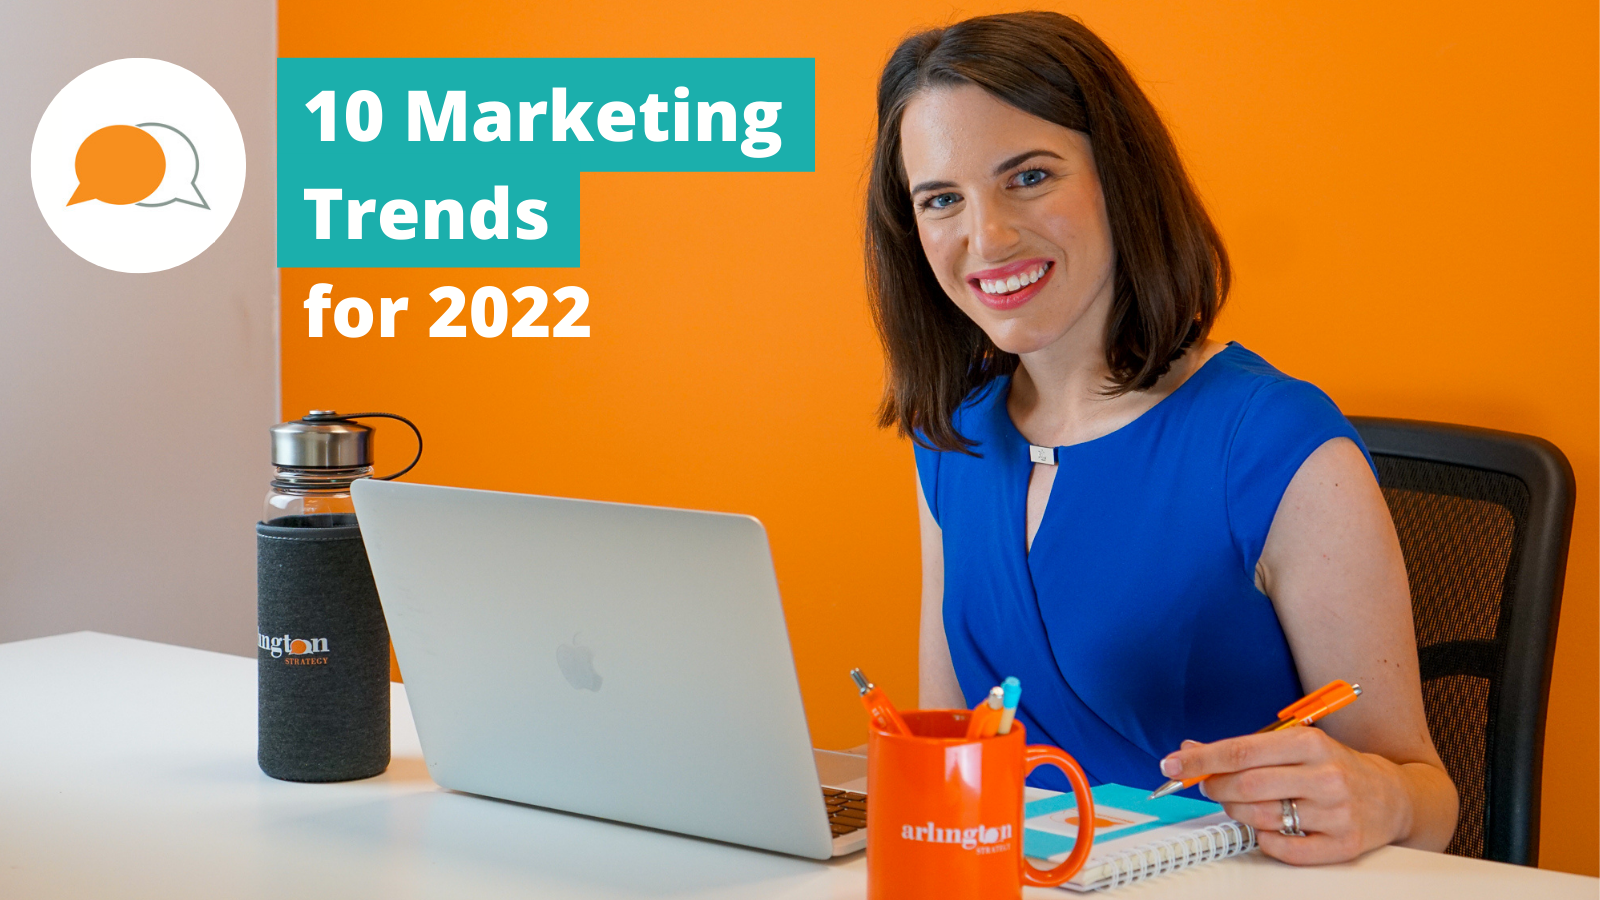 Top 10 Marketing Trends for 2022